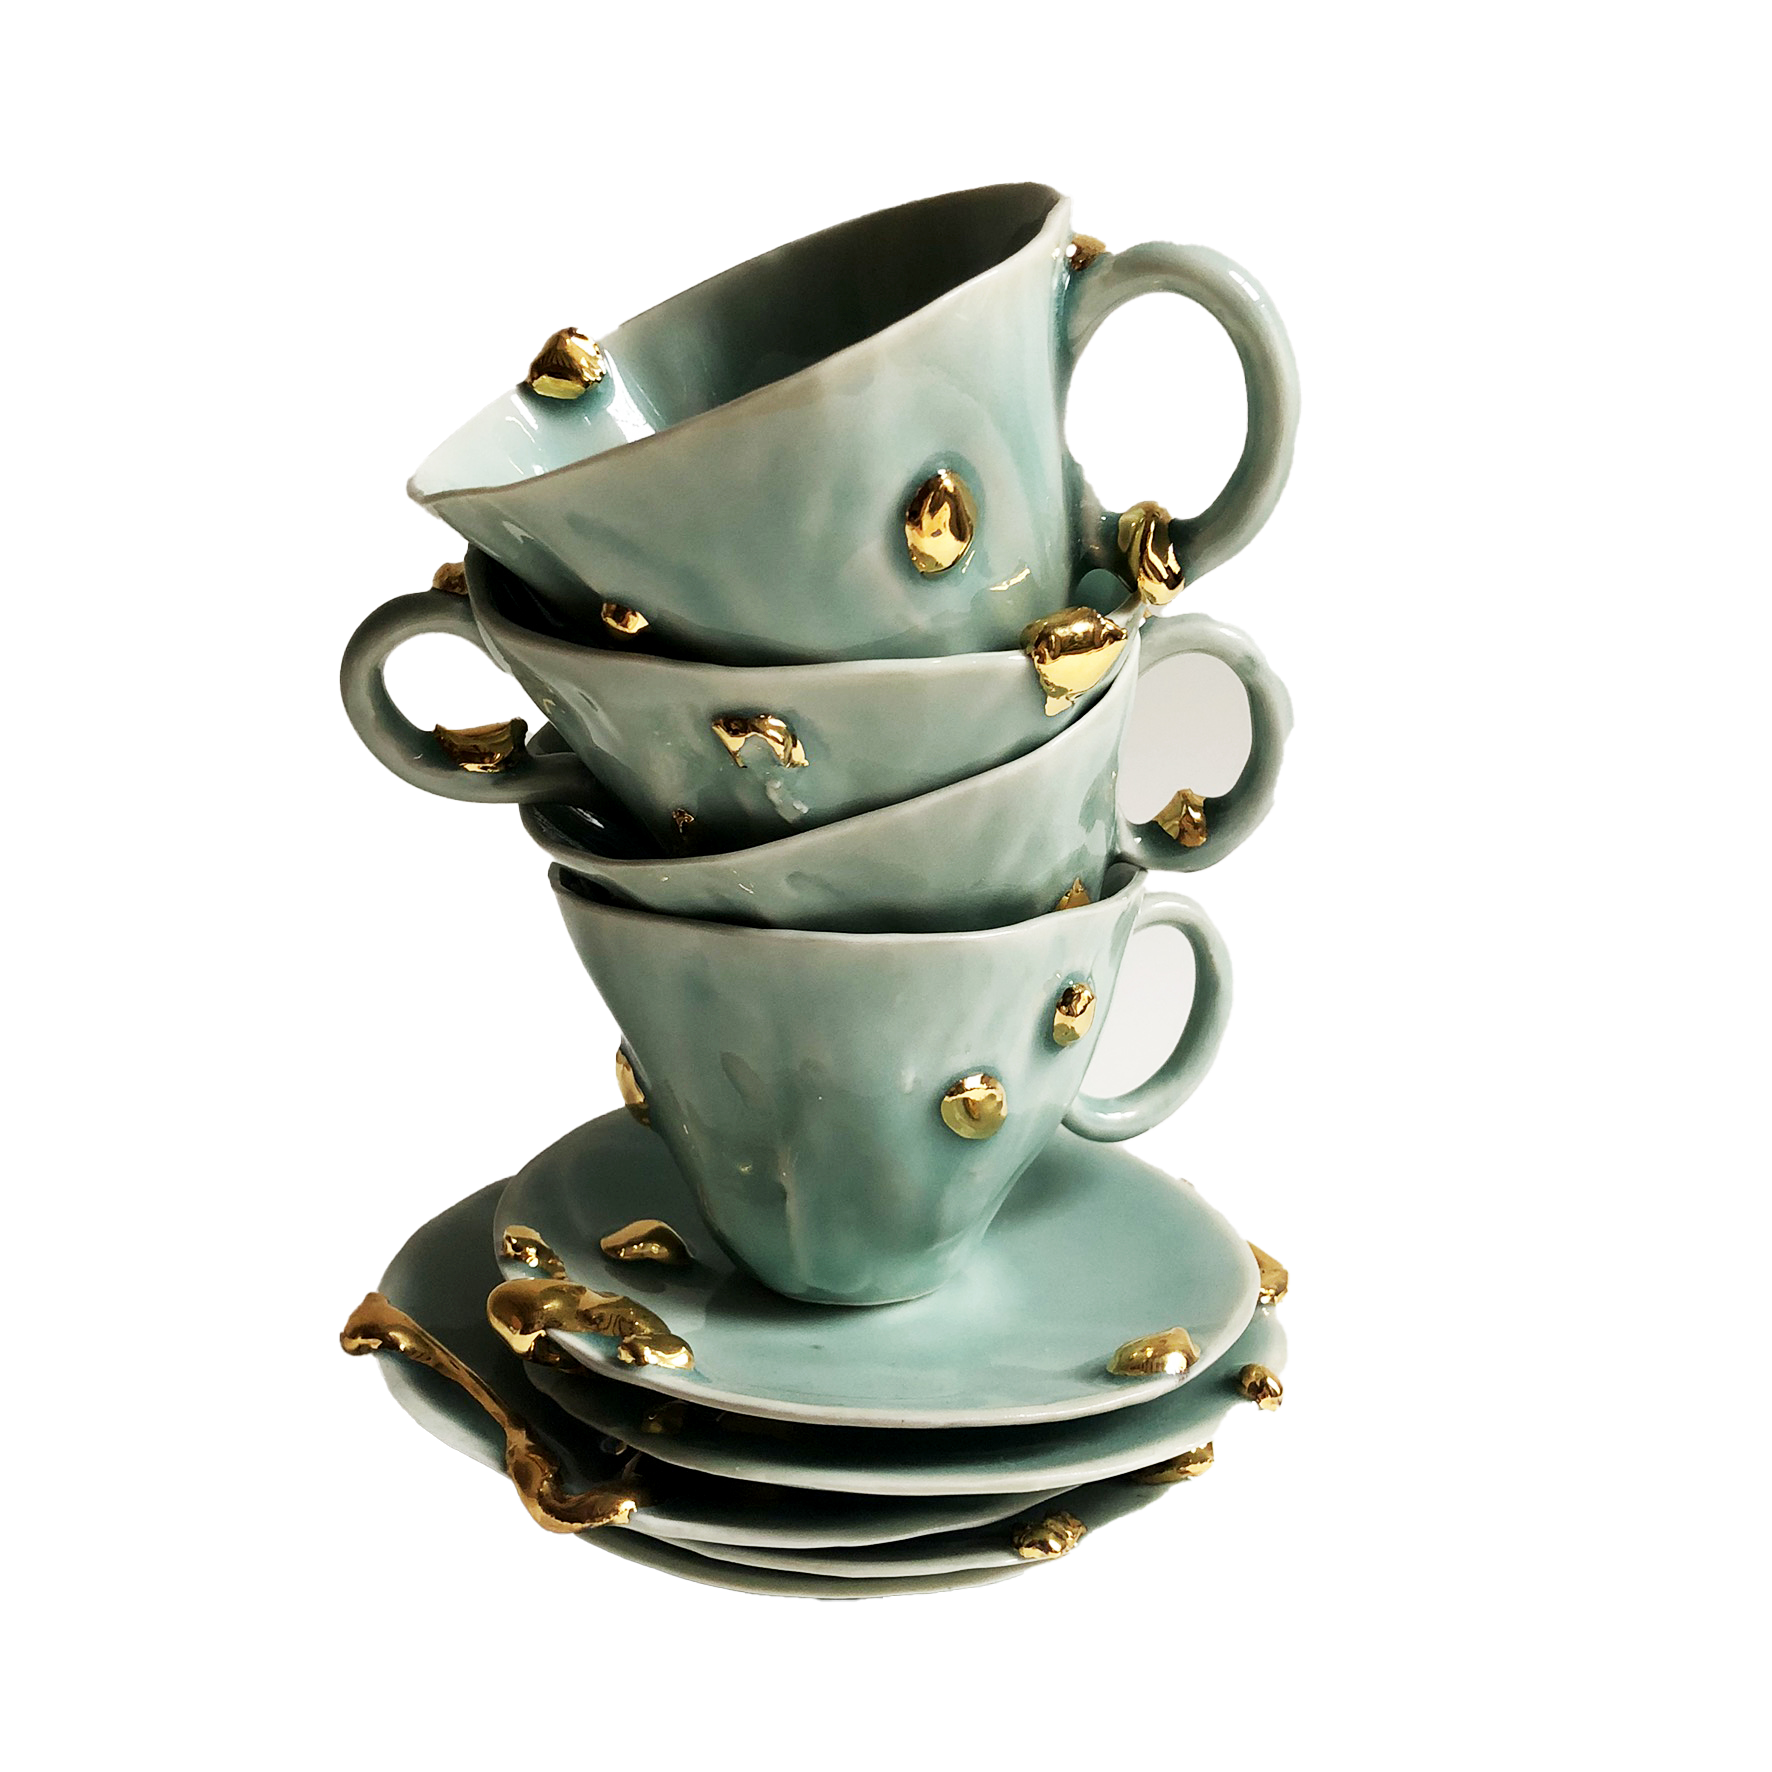 Alcaucil Teacup & Saucer in Celadon Common Things